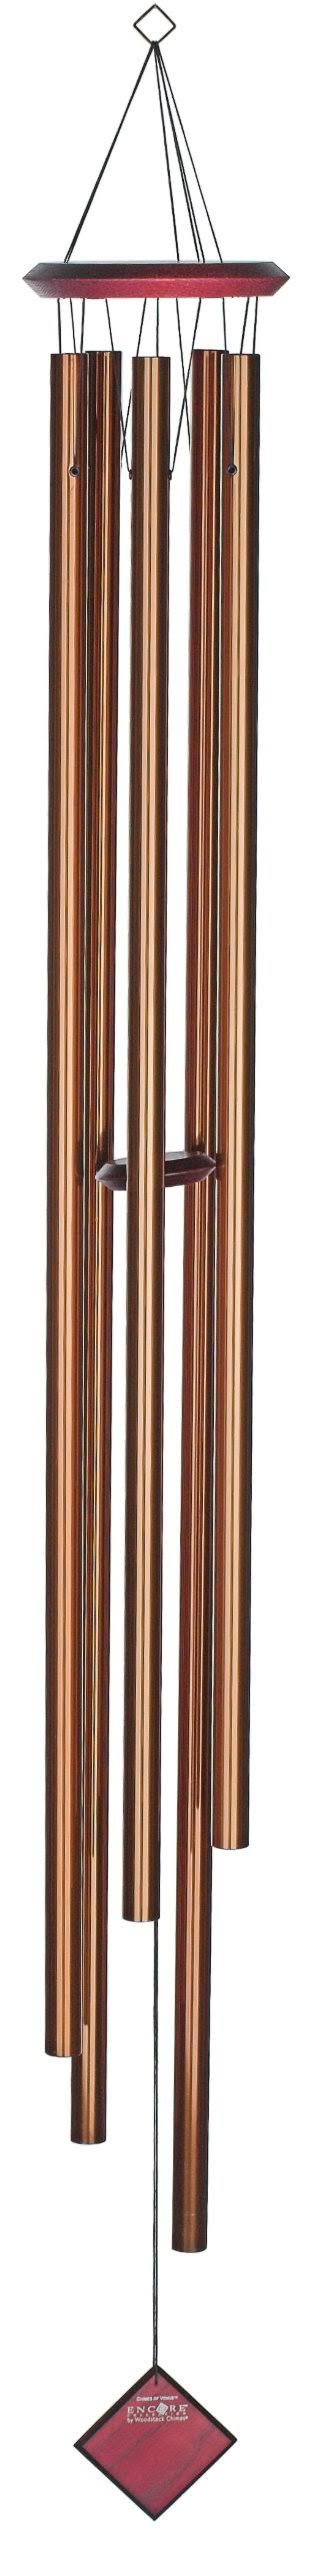 Woodstock Encore Collection Wind Chimes - Chimes of Venus, Bronze